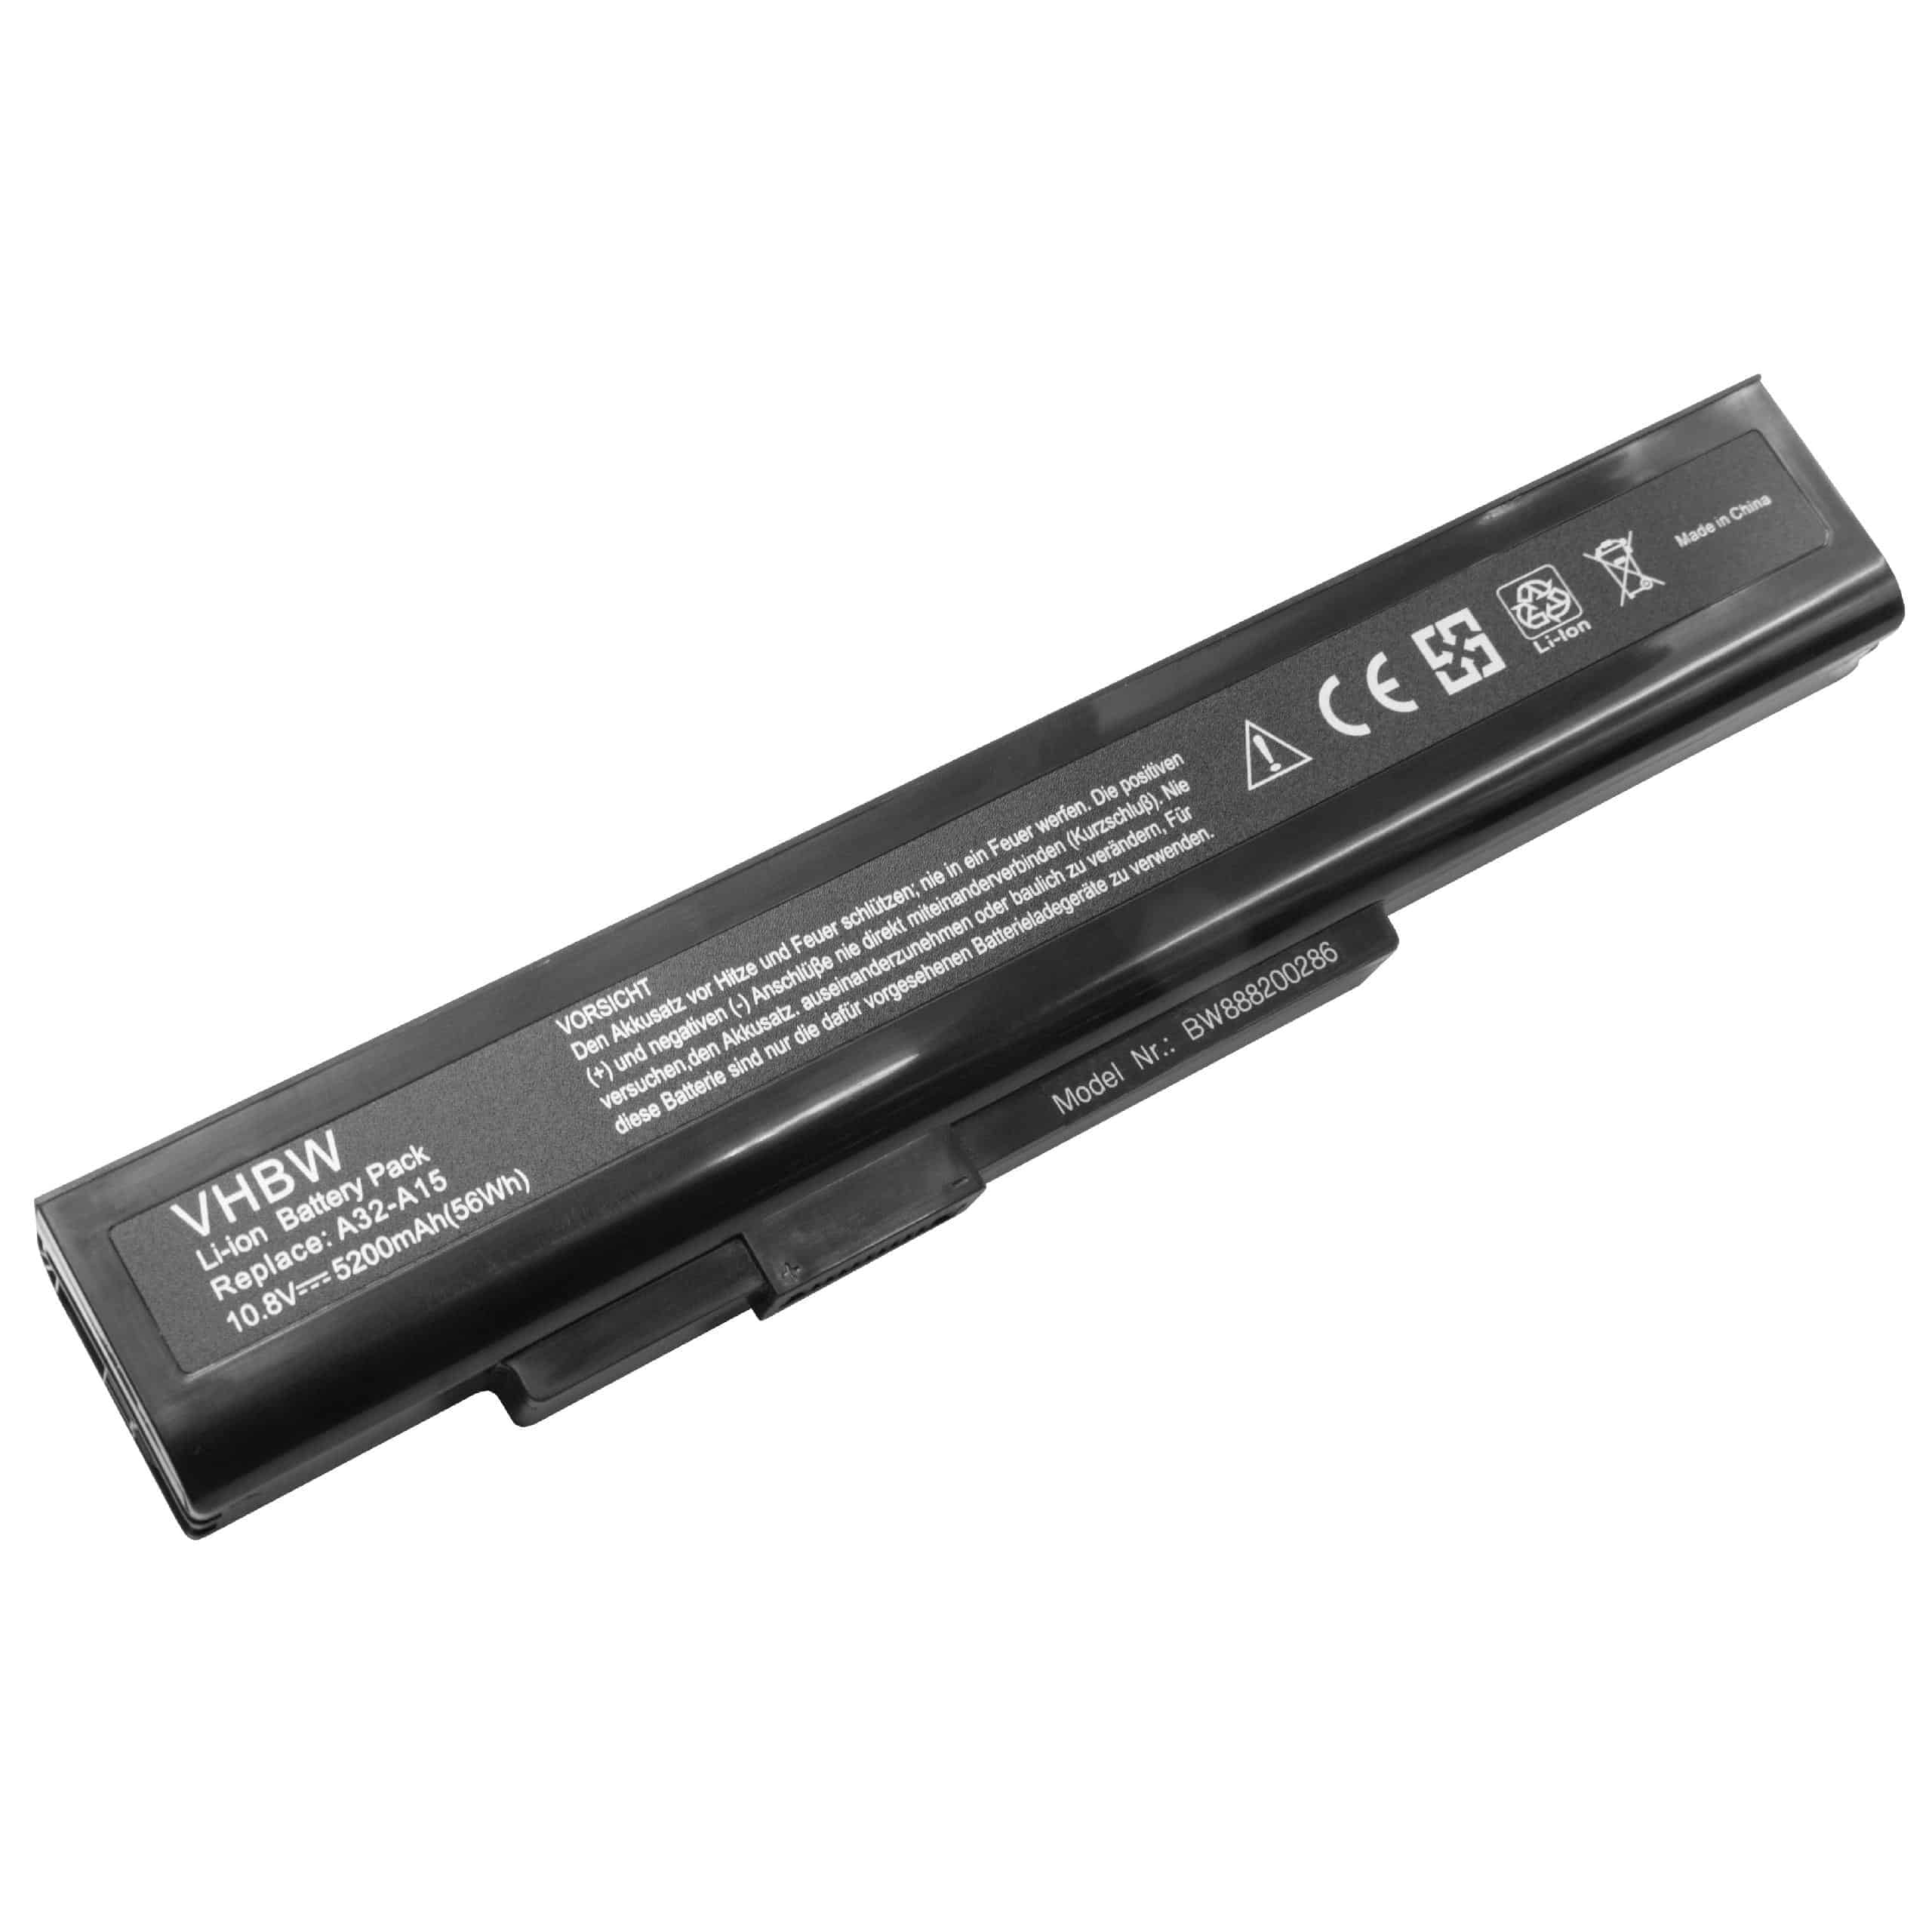 Notebook Battery Replacement for Medion A42-H36, A32-A15, A41-A15, A42-A15 - 5200mAh 10.8V Li-Ion, black